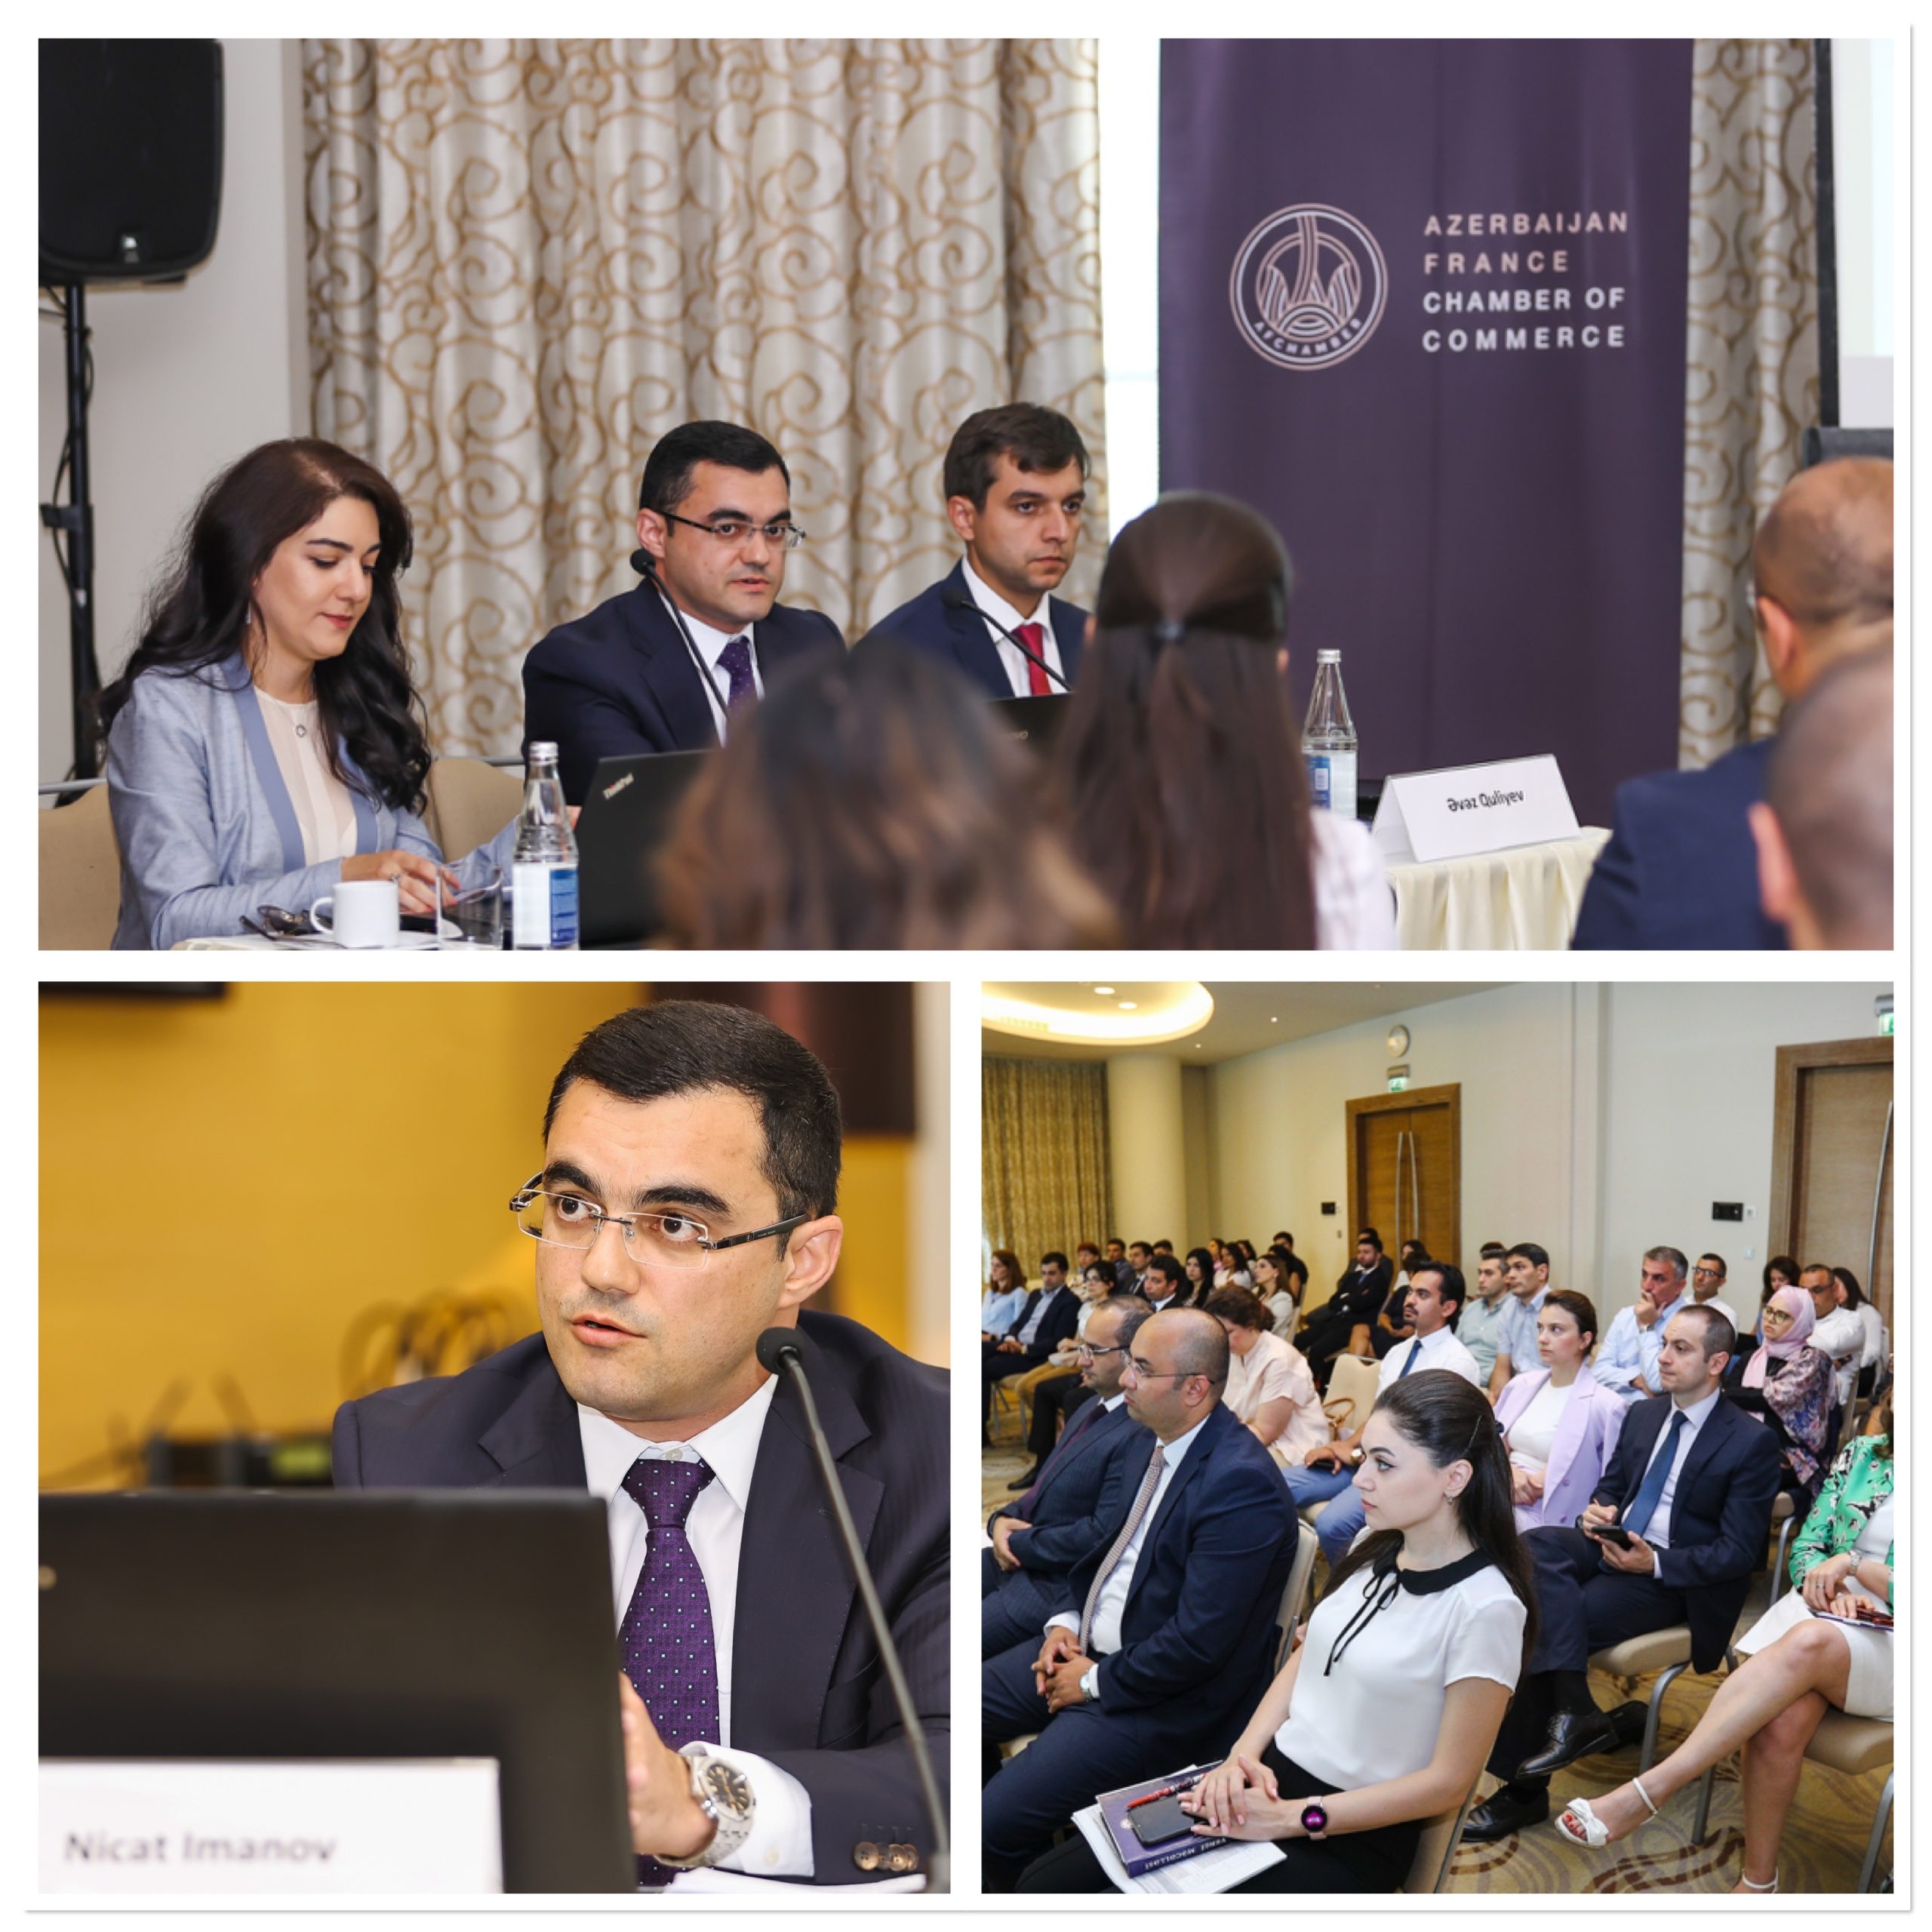 AFchamber Tax, Legal, and Finance Committee launched an event on “Proposed amendments to the Tax Code of the Republic of Azerbaijan” with the participation of Nicat Imanov, Chief of the Main Department of Tax Policy at the State Tax Service.